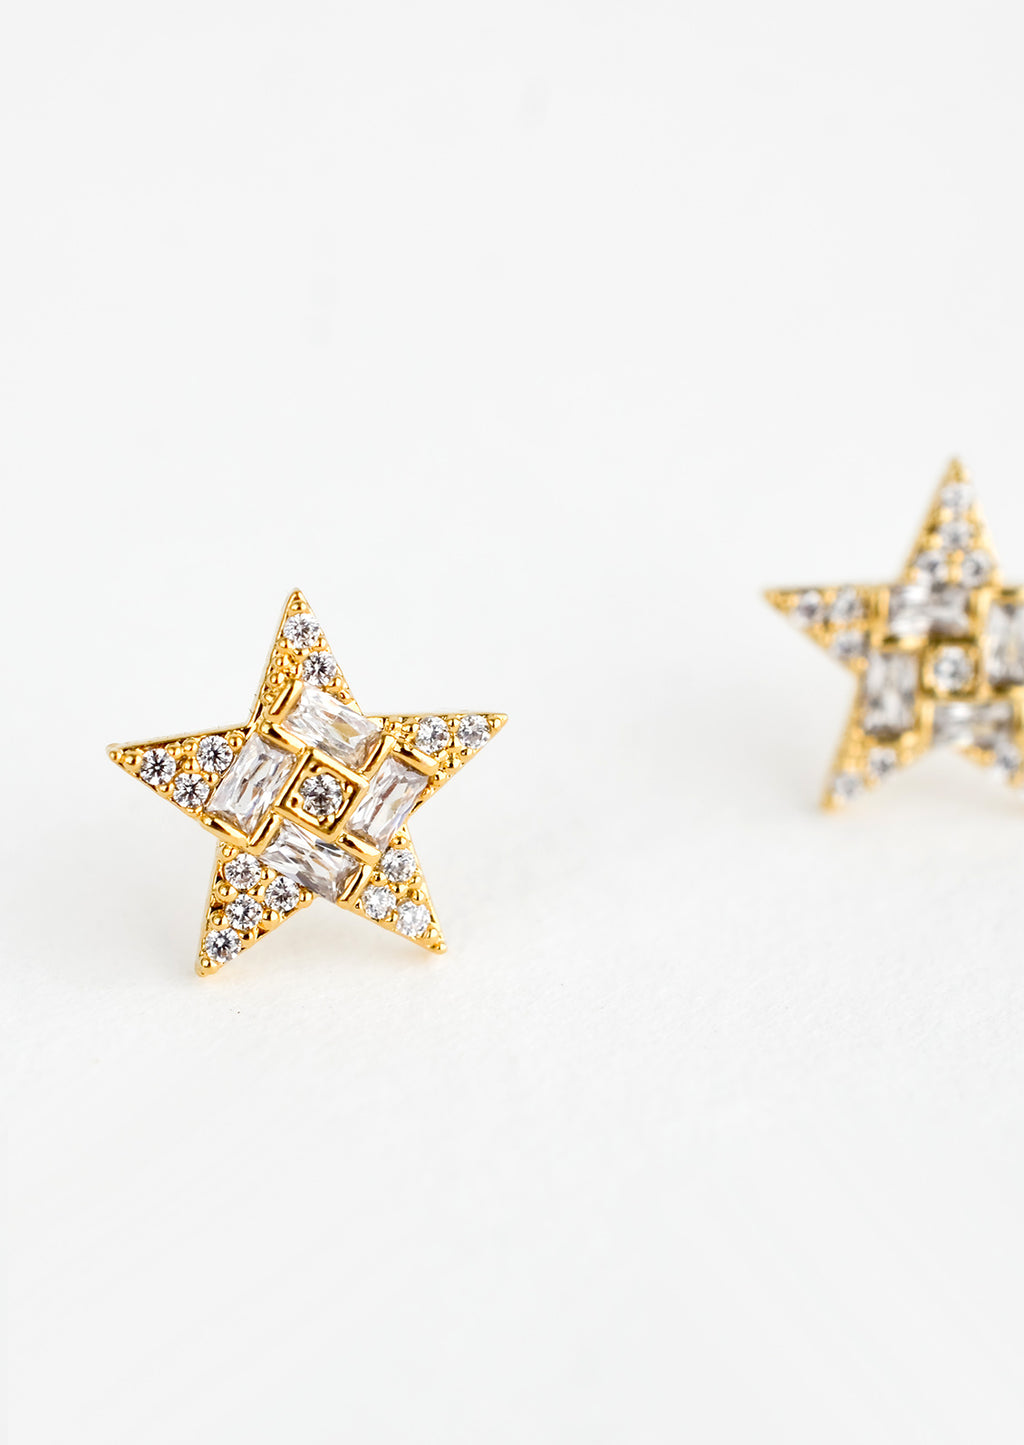 2: A pair of gold star shaped stud earrings with crystal pave detailing.